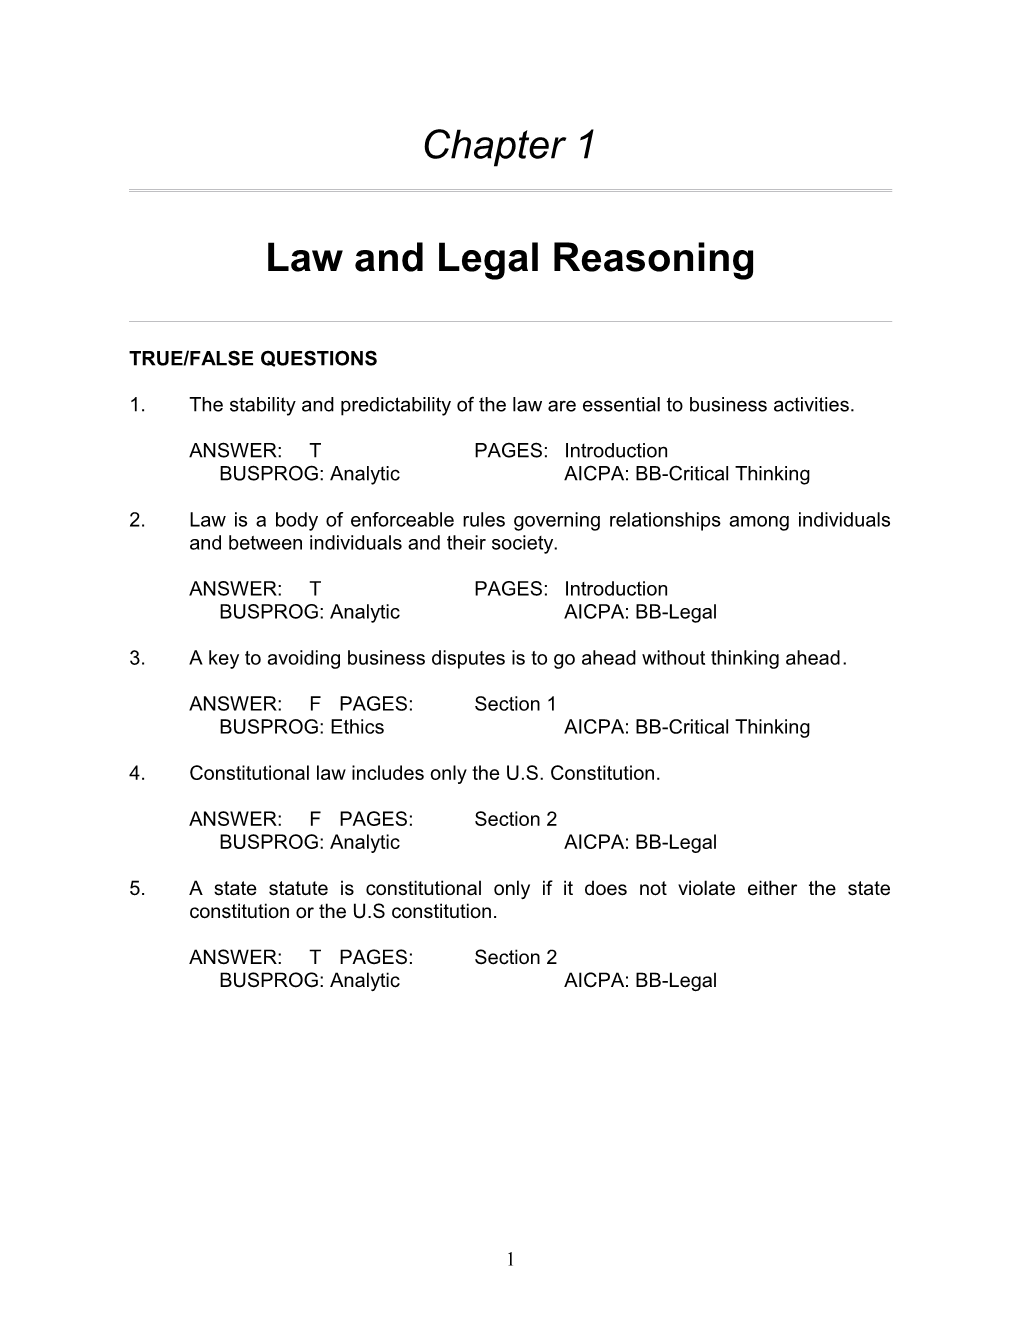 Law and Legal Reasoning